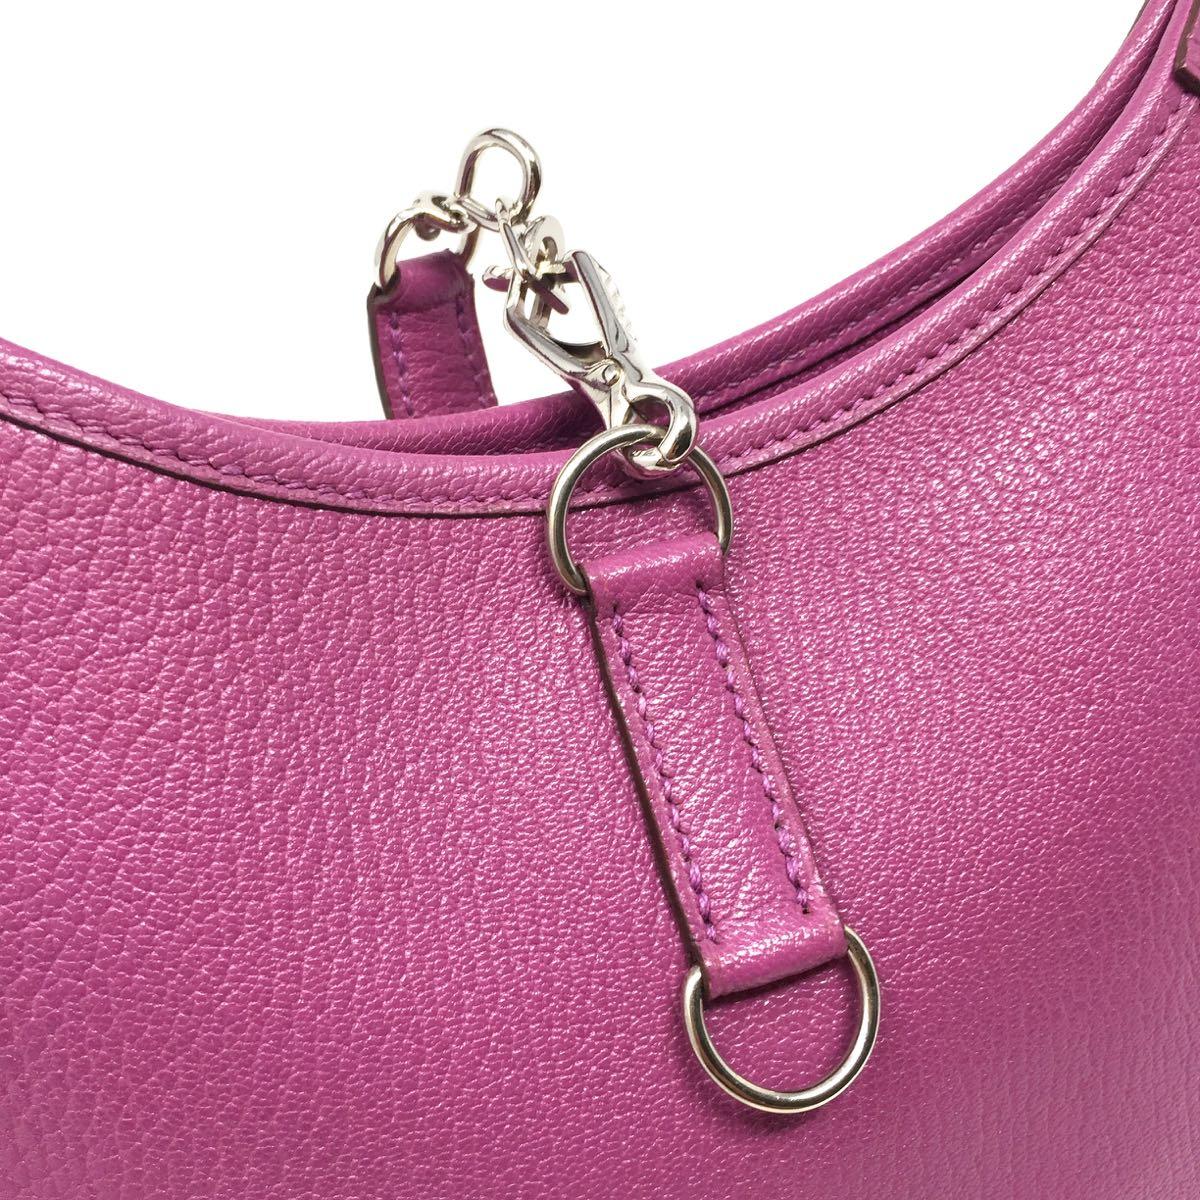 Very Particular model Hermès Cyclamen Chevre Mysore Leather Trim 24, very good condition,
year 2004 H in a square. 
Dust bag included. 
Dimensions : 24 x 24 cm 